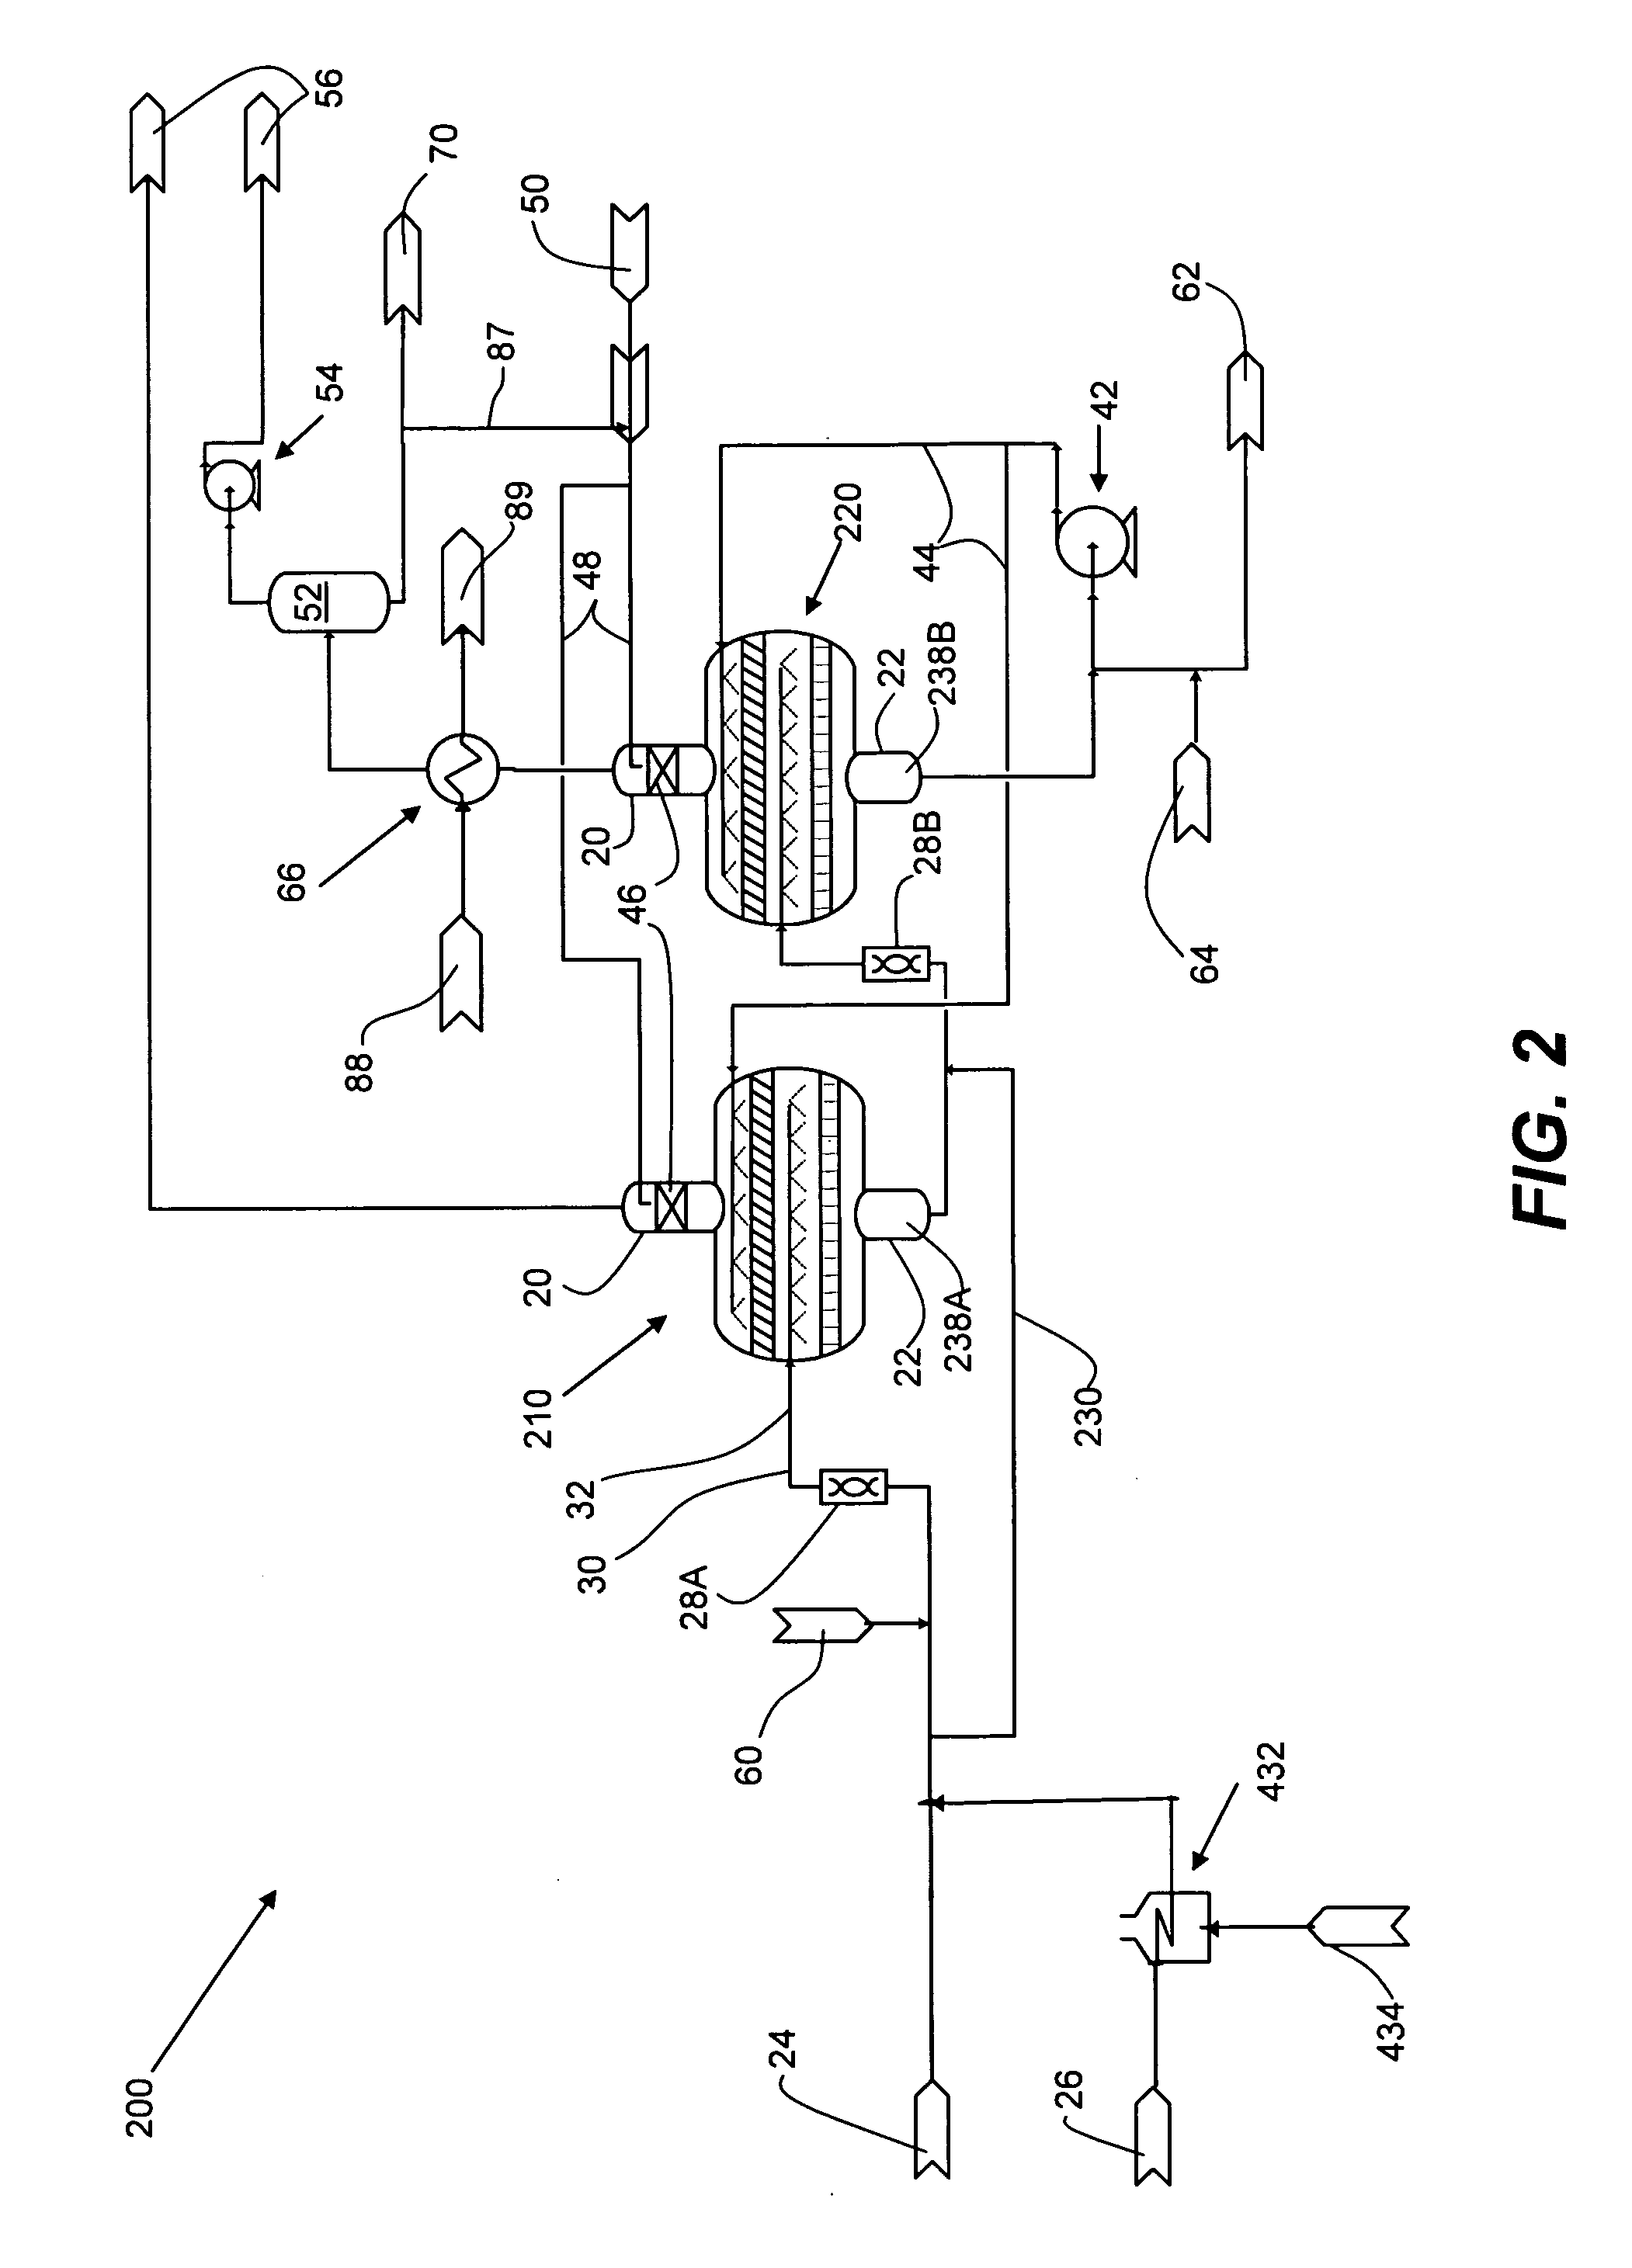 Process and apparatus for removal of oxygen from seawater